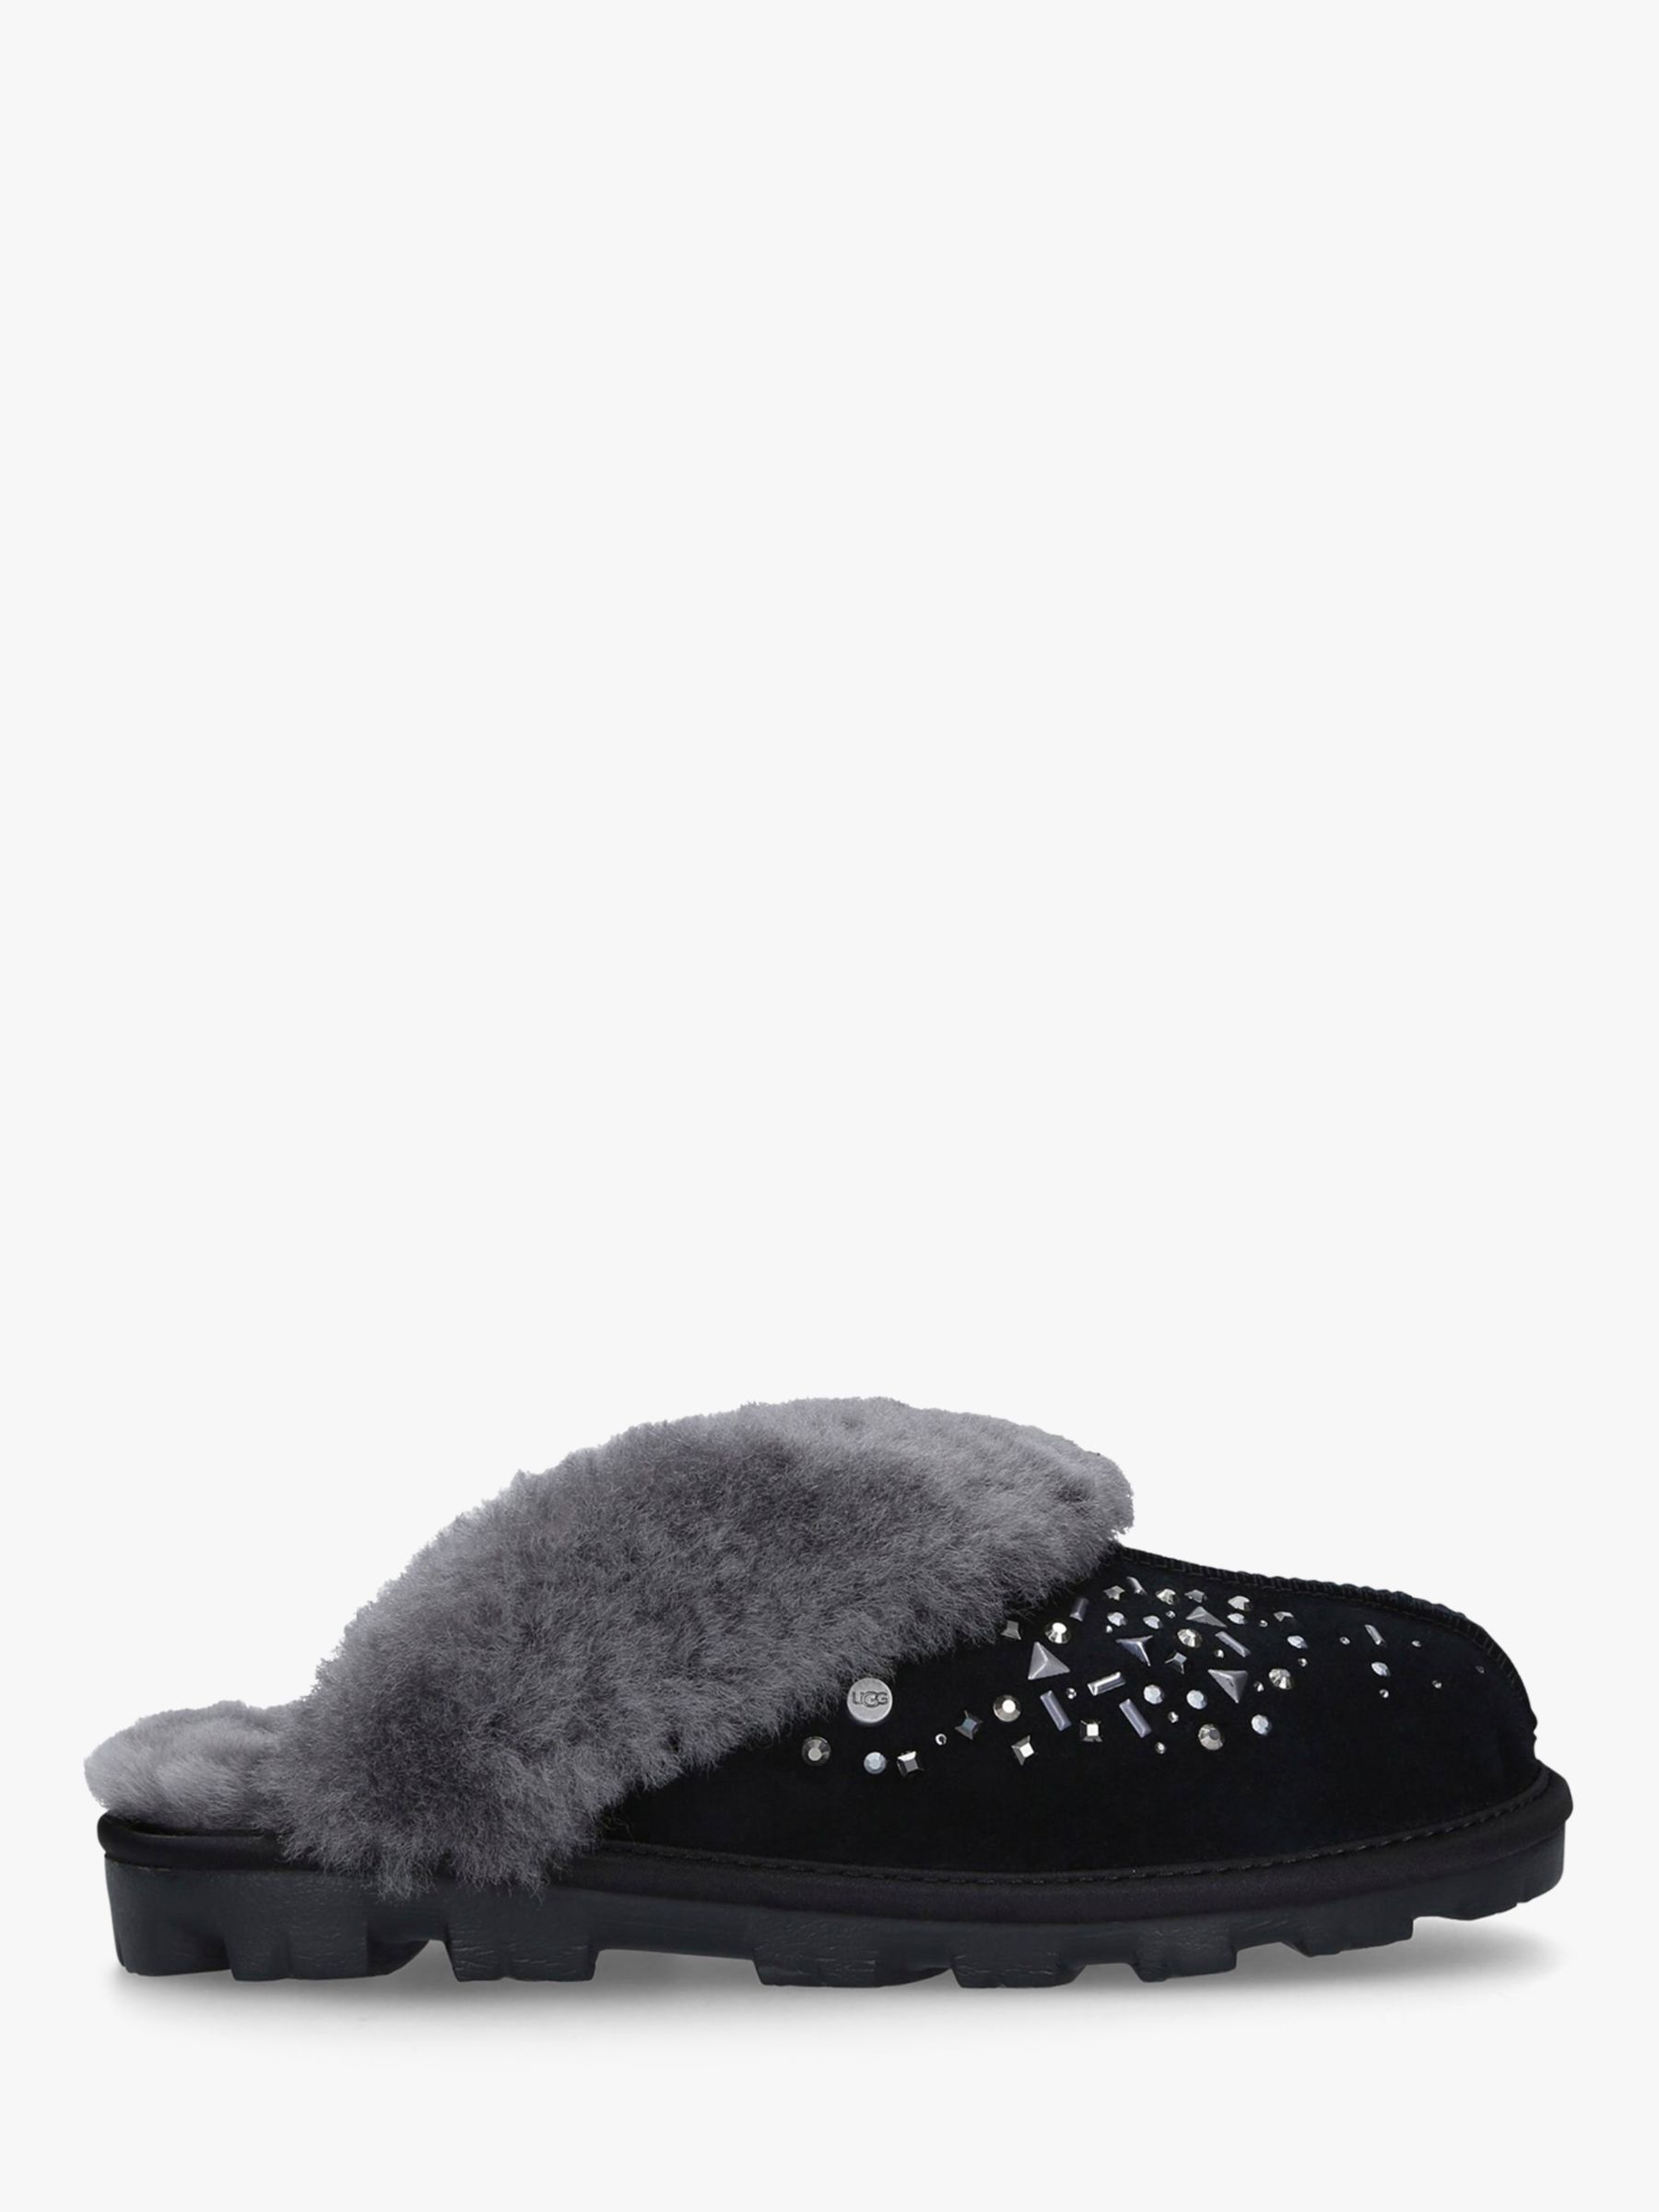 ugg coquette slippers uk